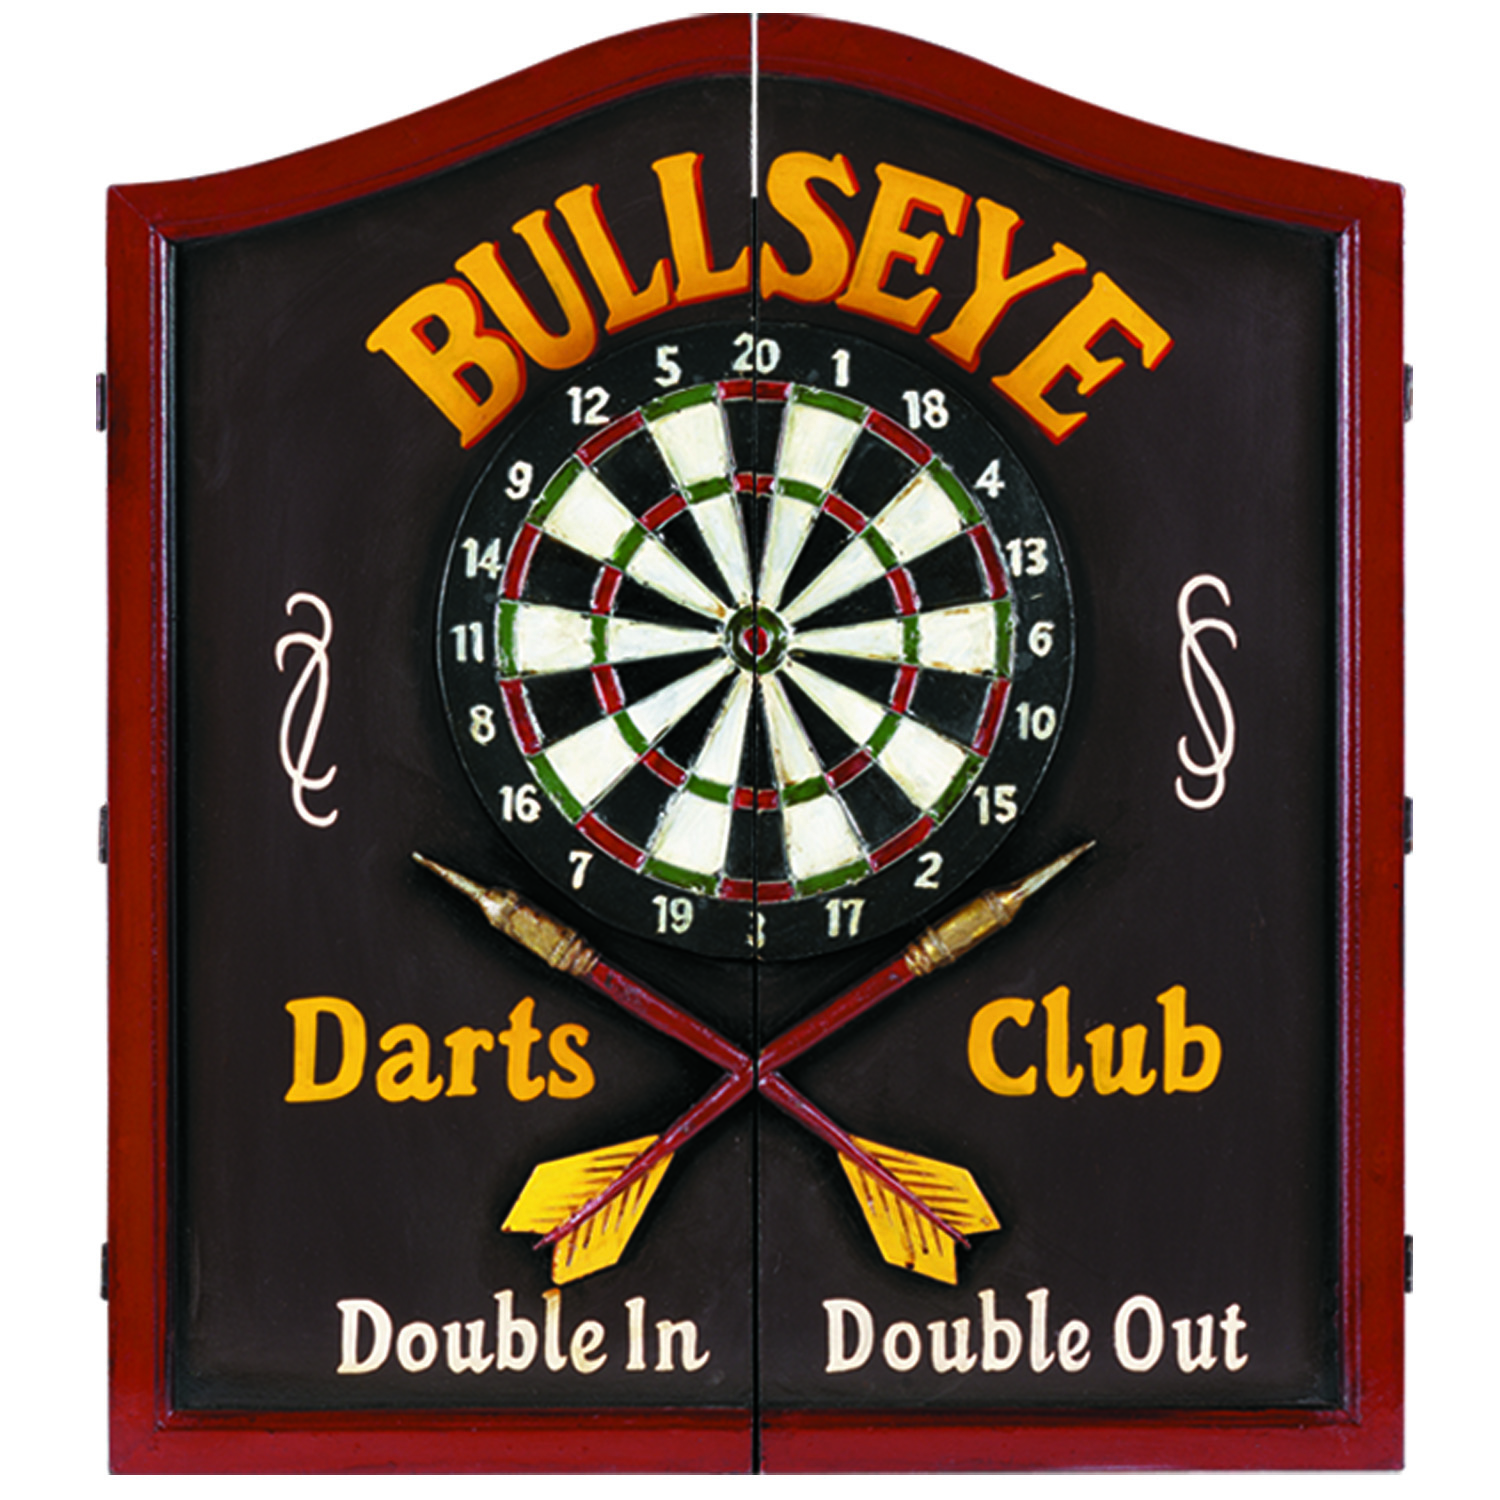 RAM Gameroom Products Wooden Dartboard Cabinet, "Bullseye Darts Club - Double In, Double Out"